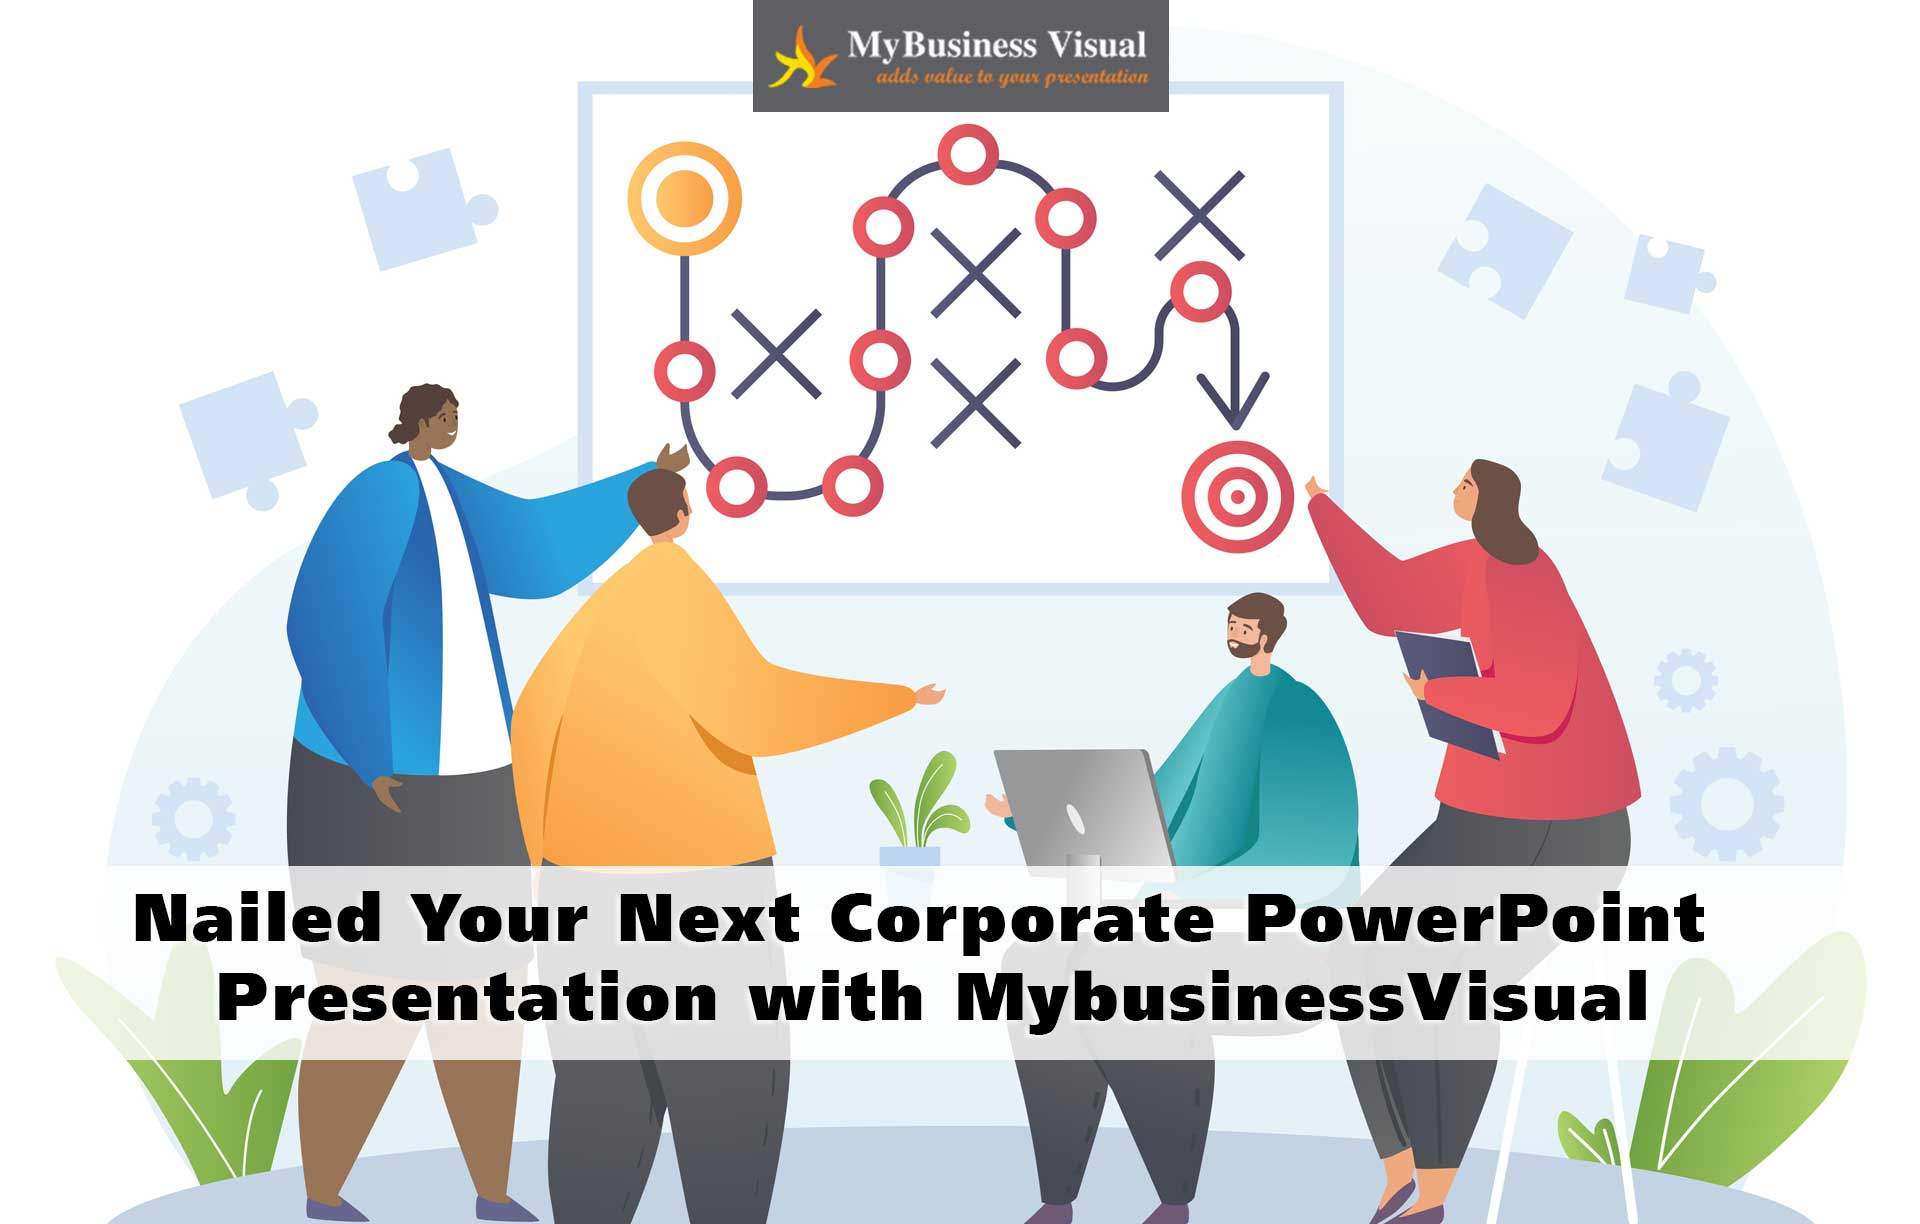 Nailed your next Corporate PowerPoint presentation with MybusinessVisual